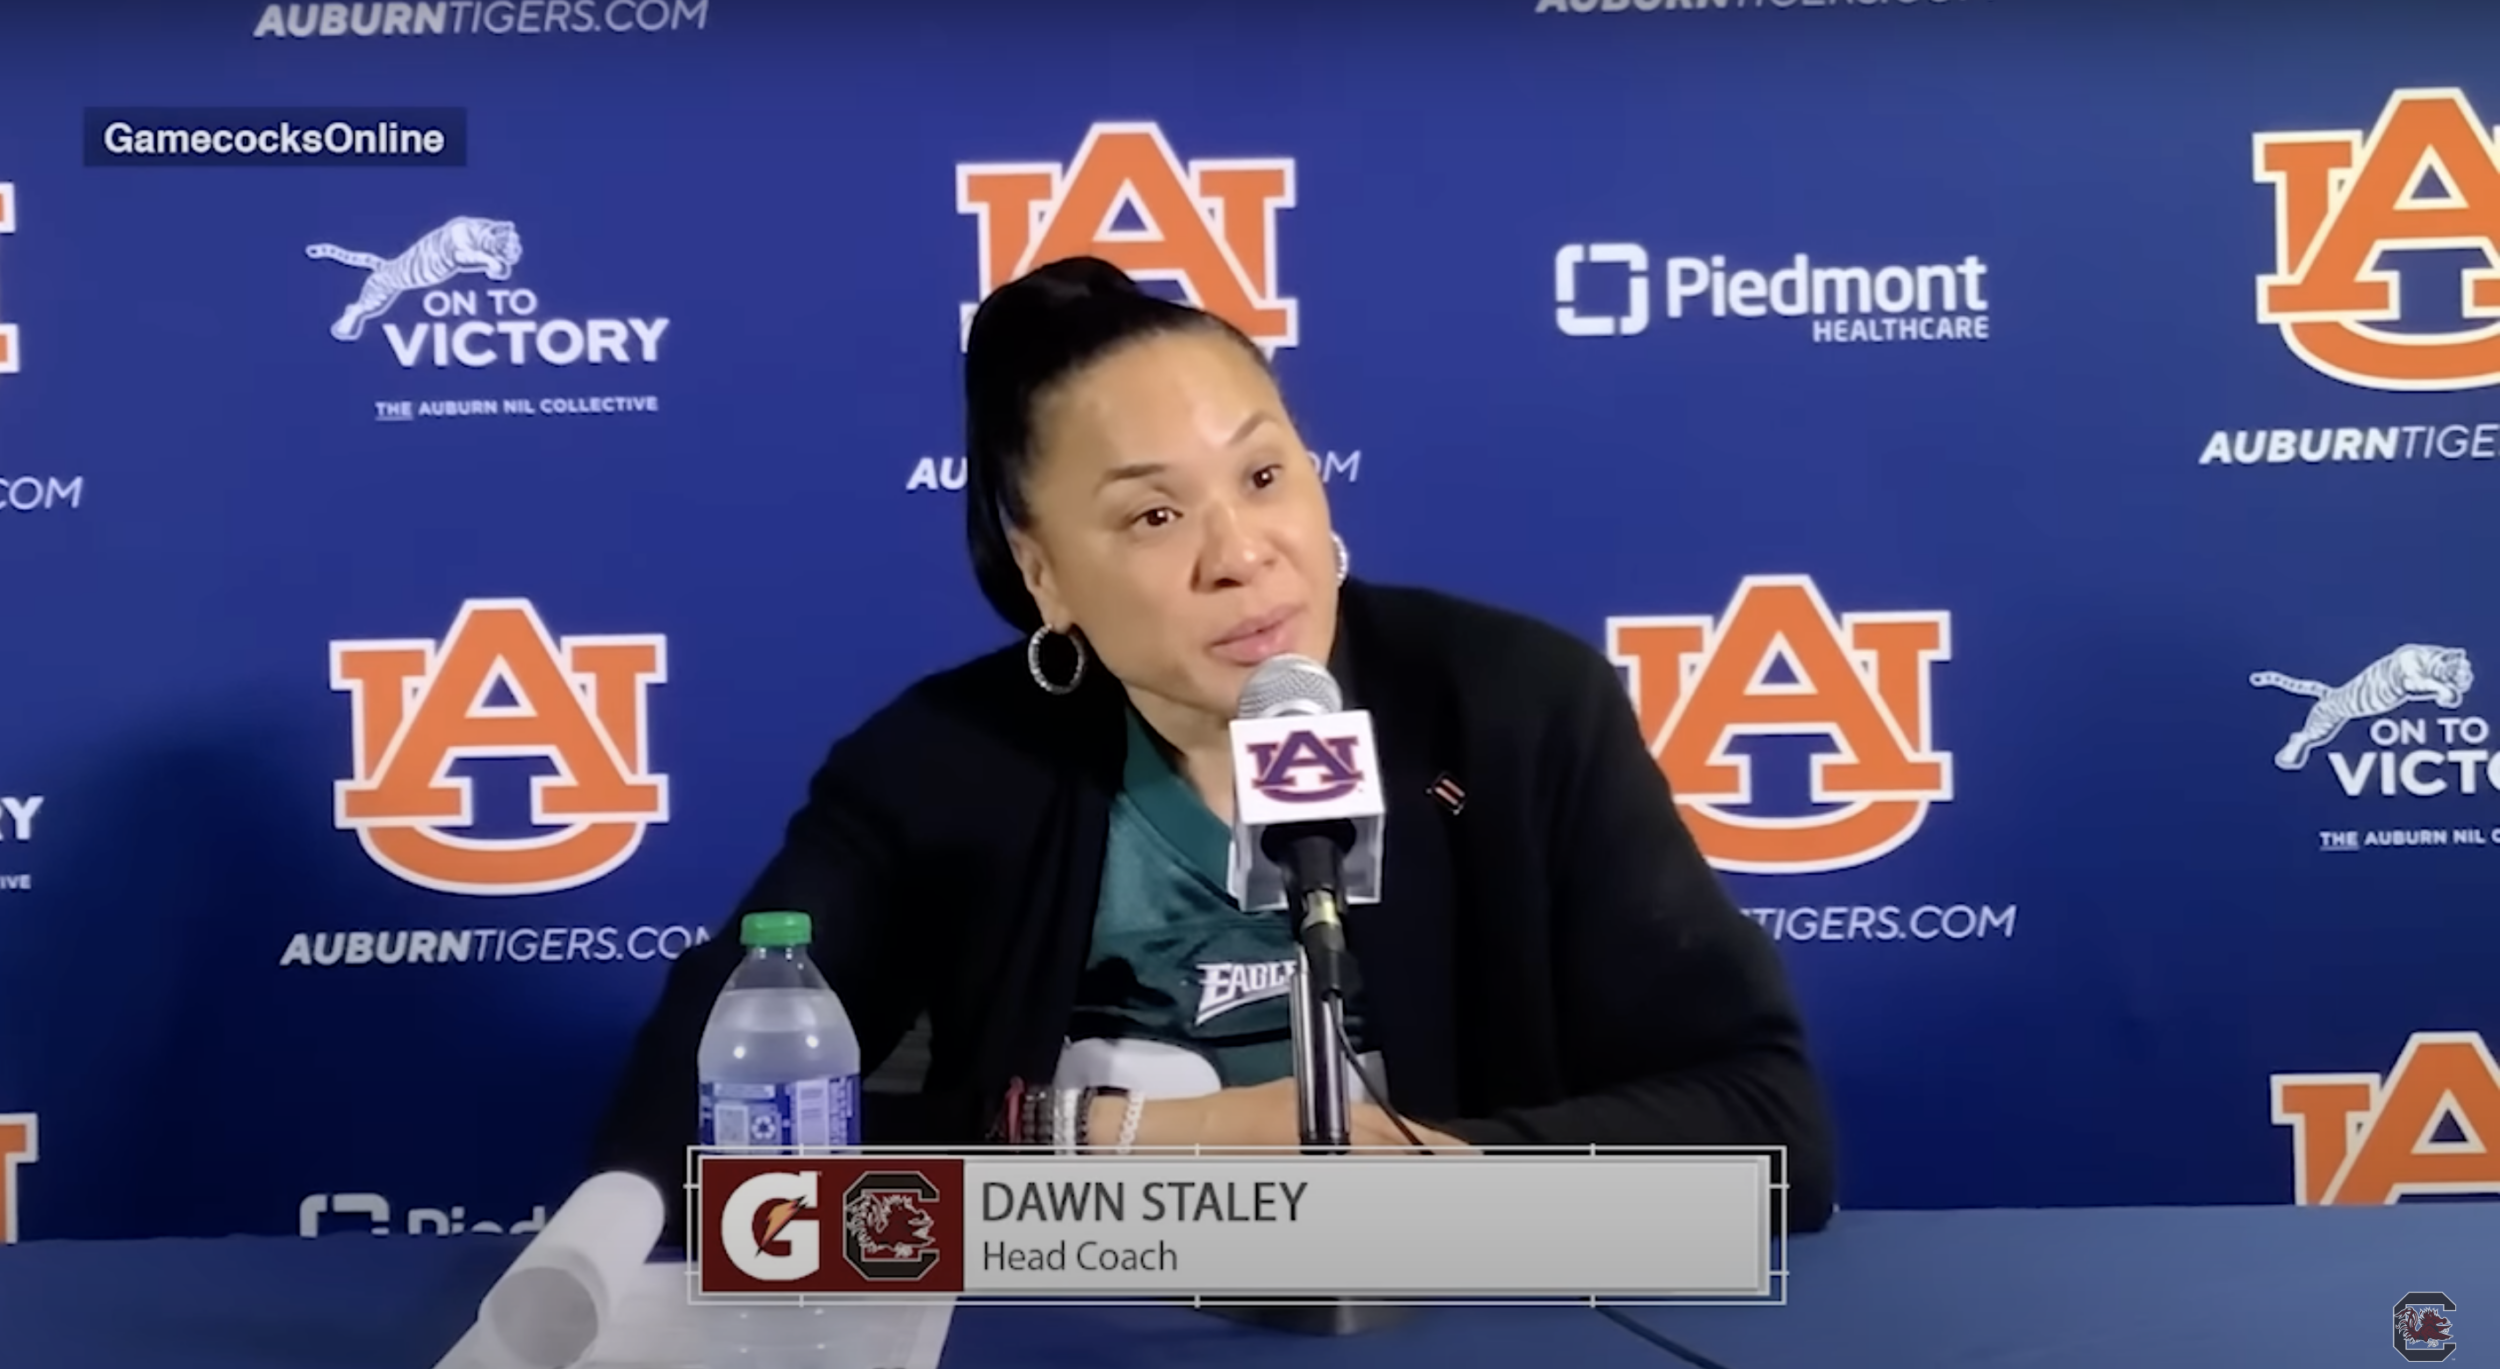 PostGame News Conference: (Auburn) - Dawn Staley